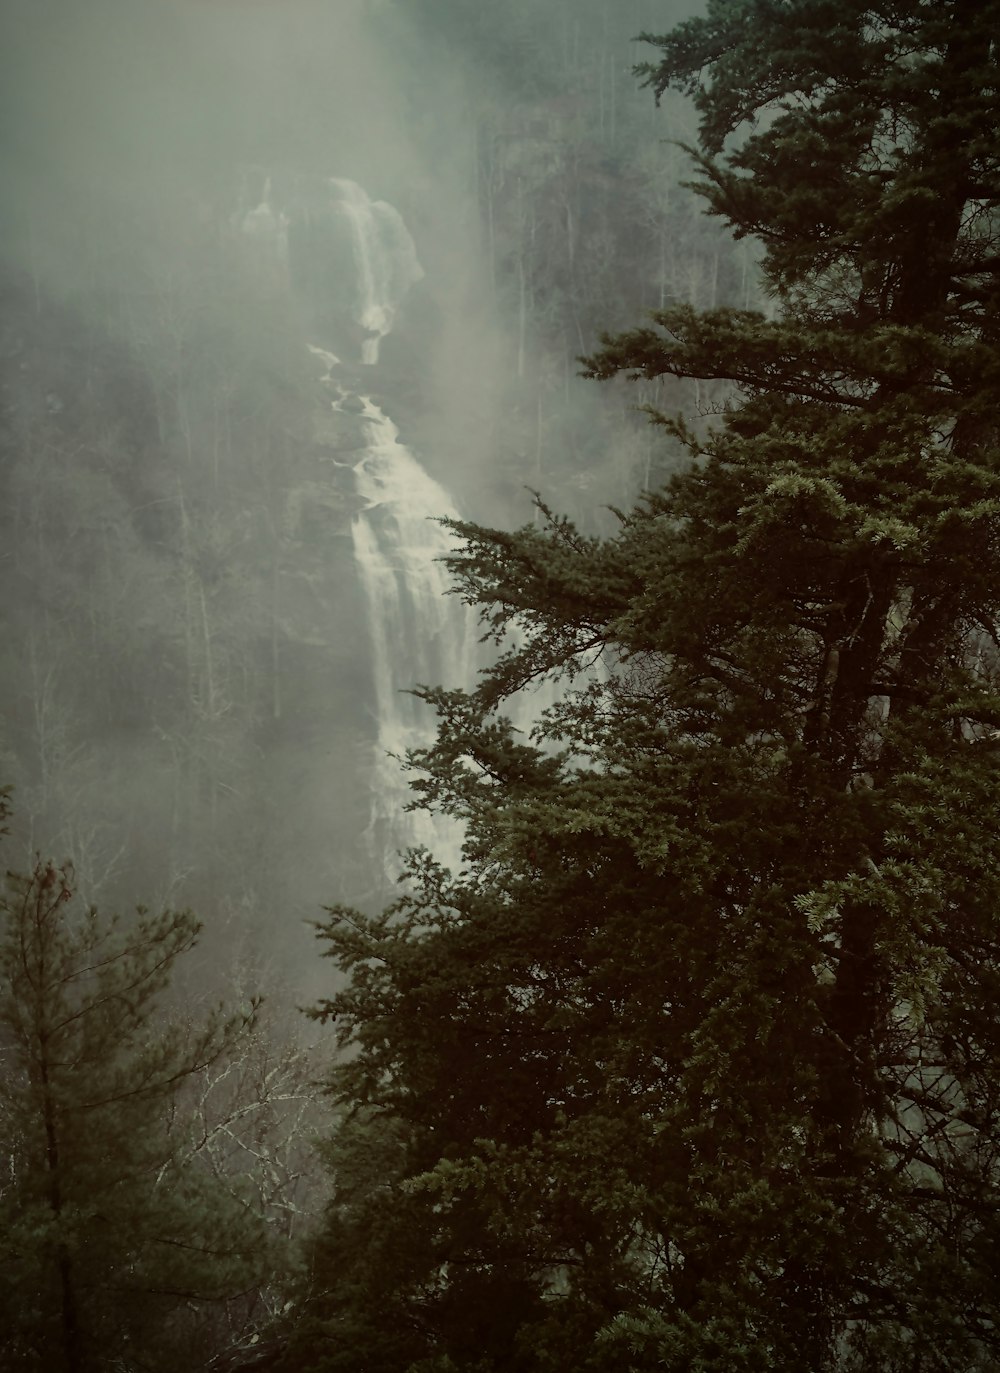 a tall waterfall surrounded by trees in a foggy forest